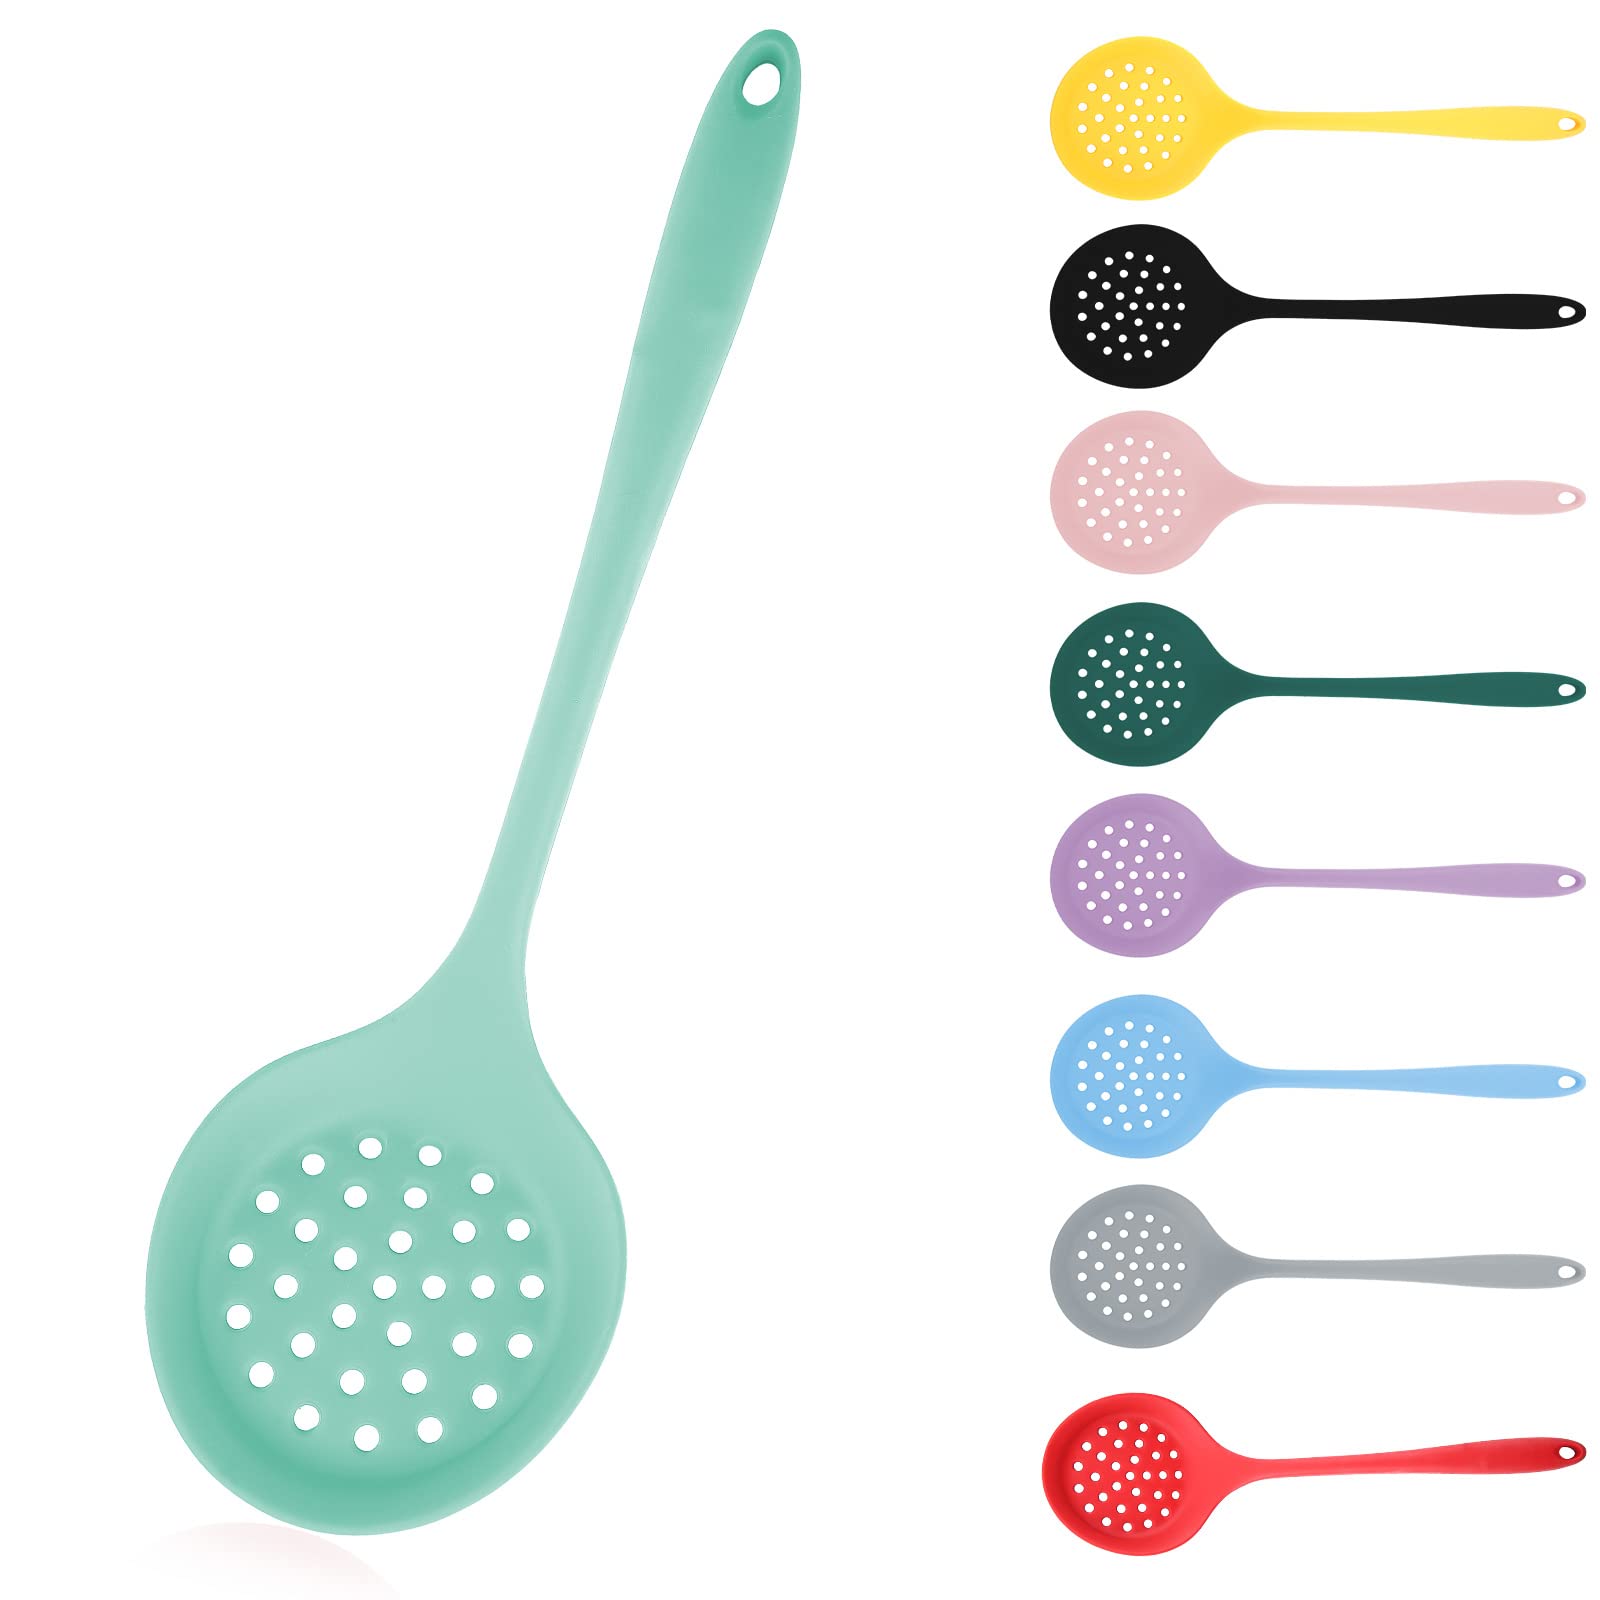 Silicone Slotted Spoon, Strainer Spoon, Skimmer Spoon, Slotted Spoons for Cooking, Silicone Strainer Non Stick, One-Piece Heat Resistant Silicone Cooking Spoon (Green)